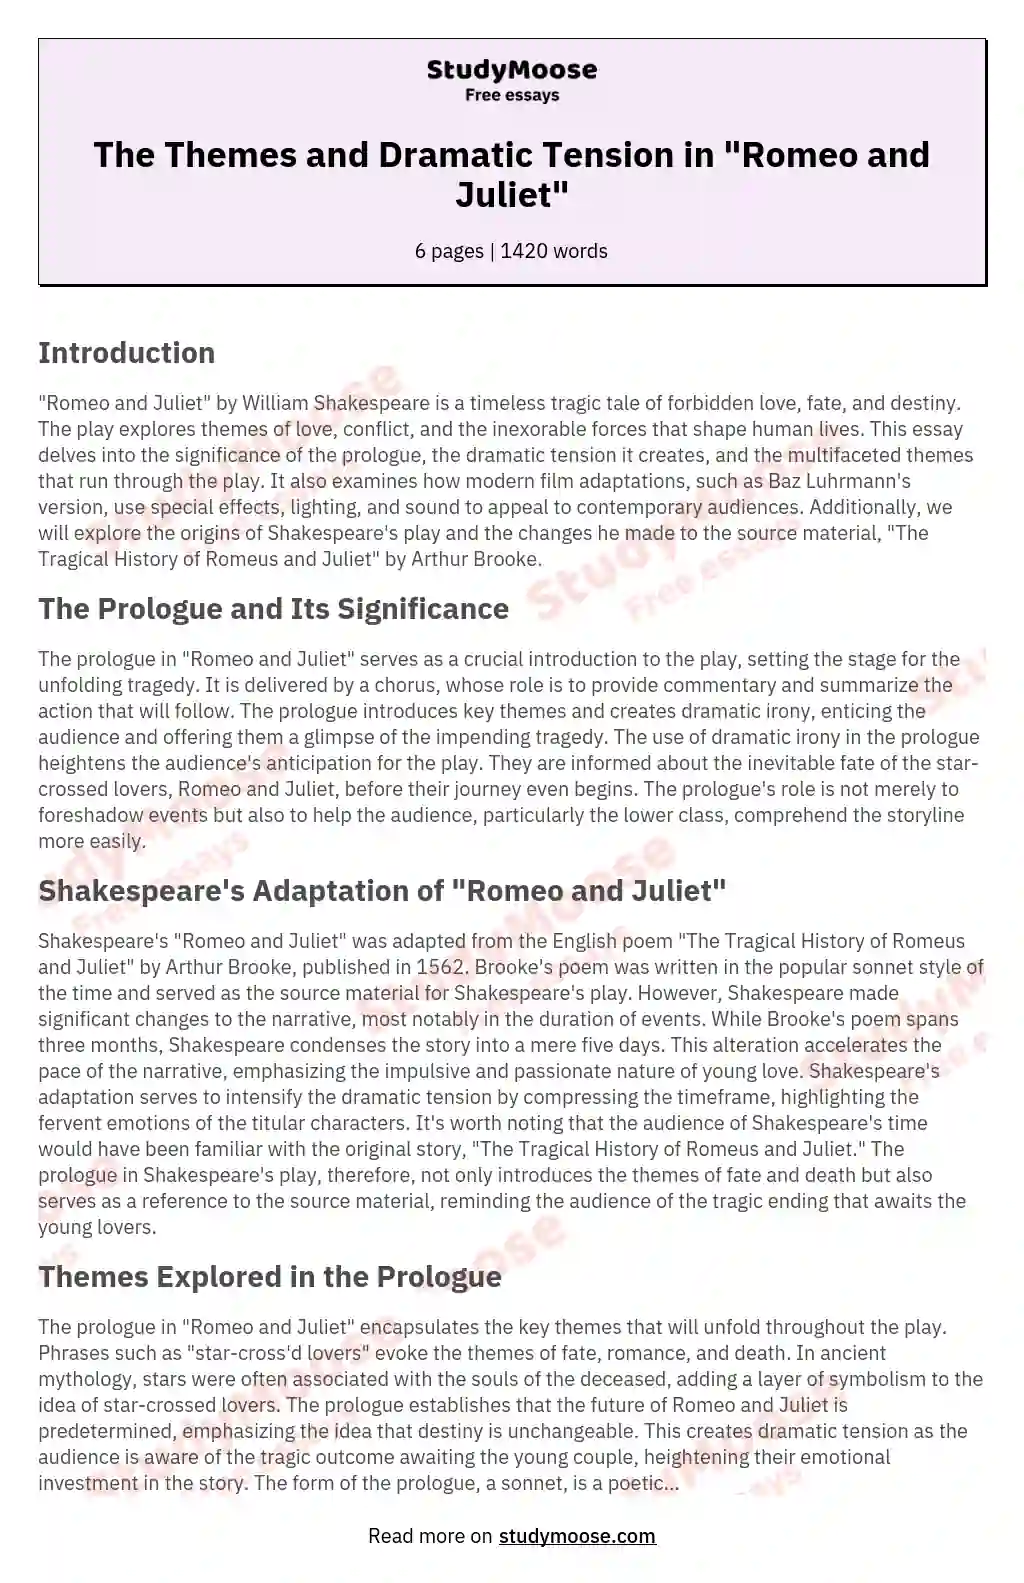 The Themes and Dramatic Tension in "Romeo and Juliet" essay